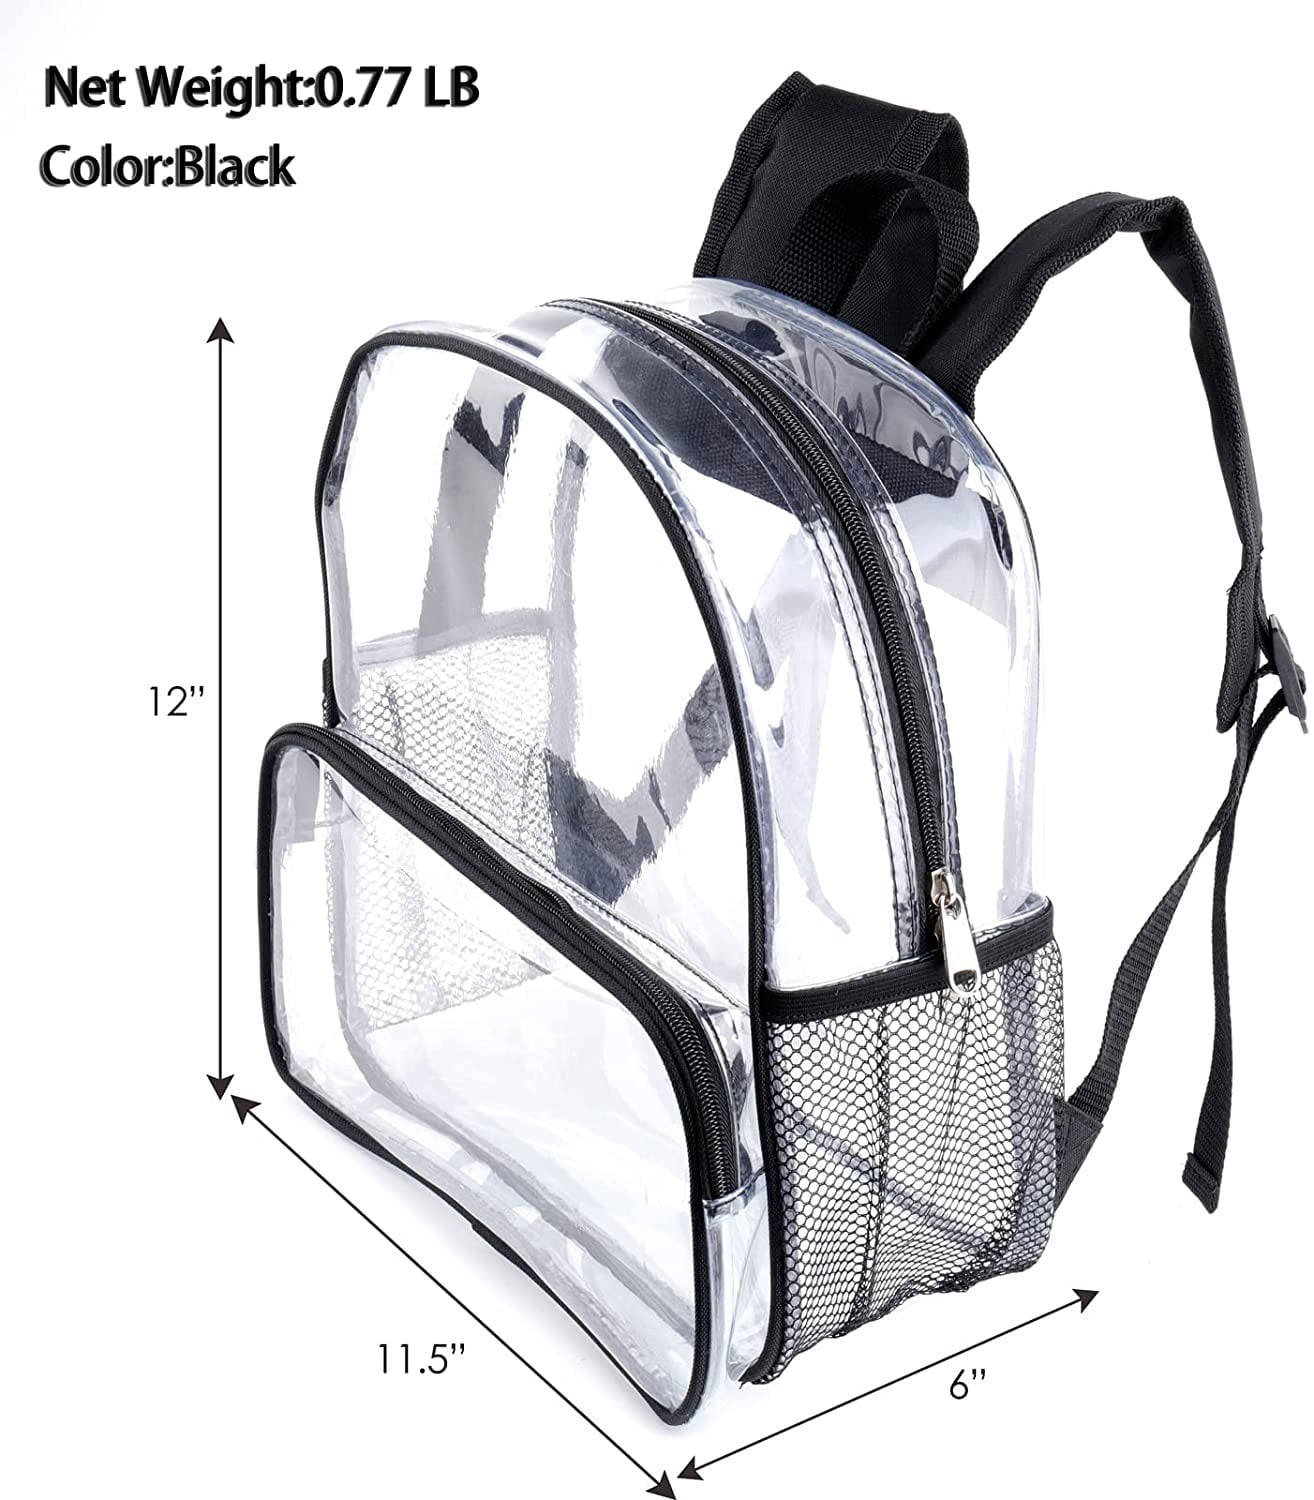 Vorspack Clear Mini Backpack - Stadium Approved 12x12x6 Small Clear  Backpack for Women Stadium Backpack with 2 Water Holders Heavy Duty for  Concert